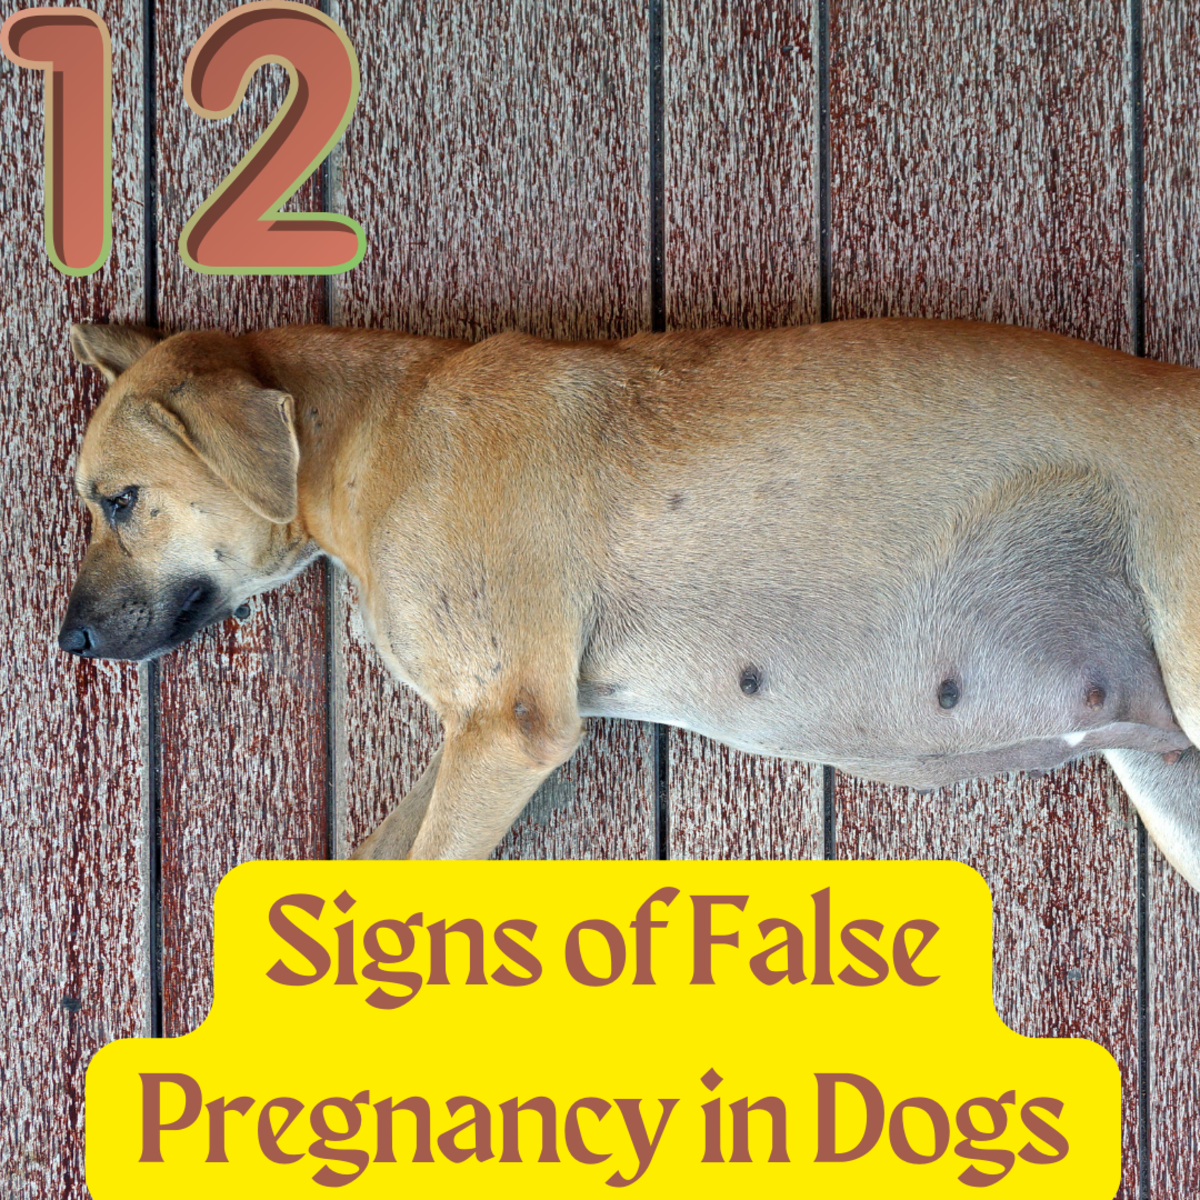 12 Signs of False Pregnancy in Dogs